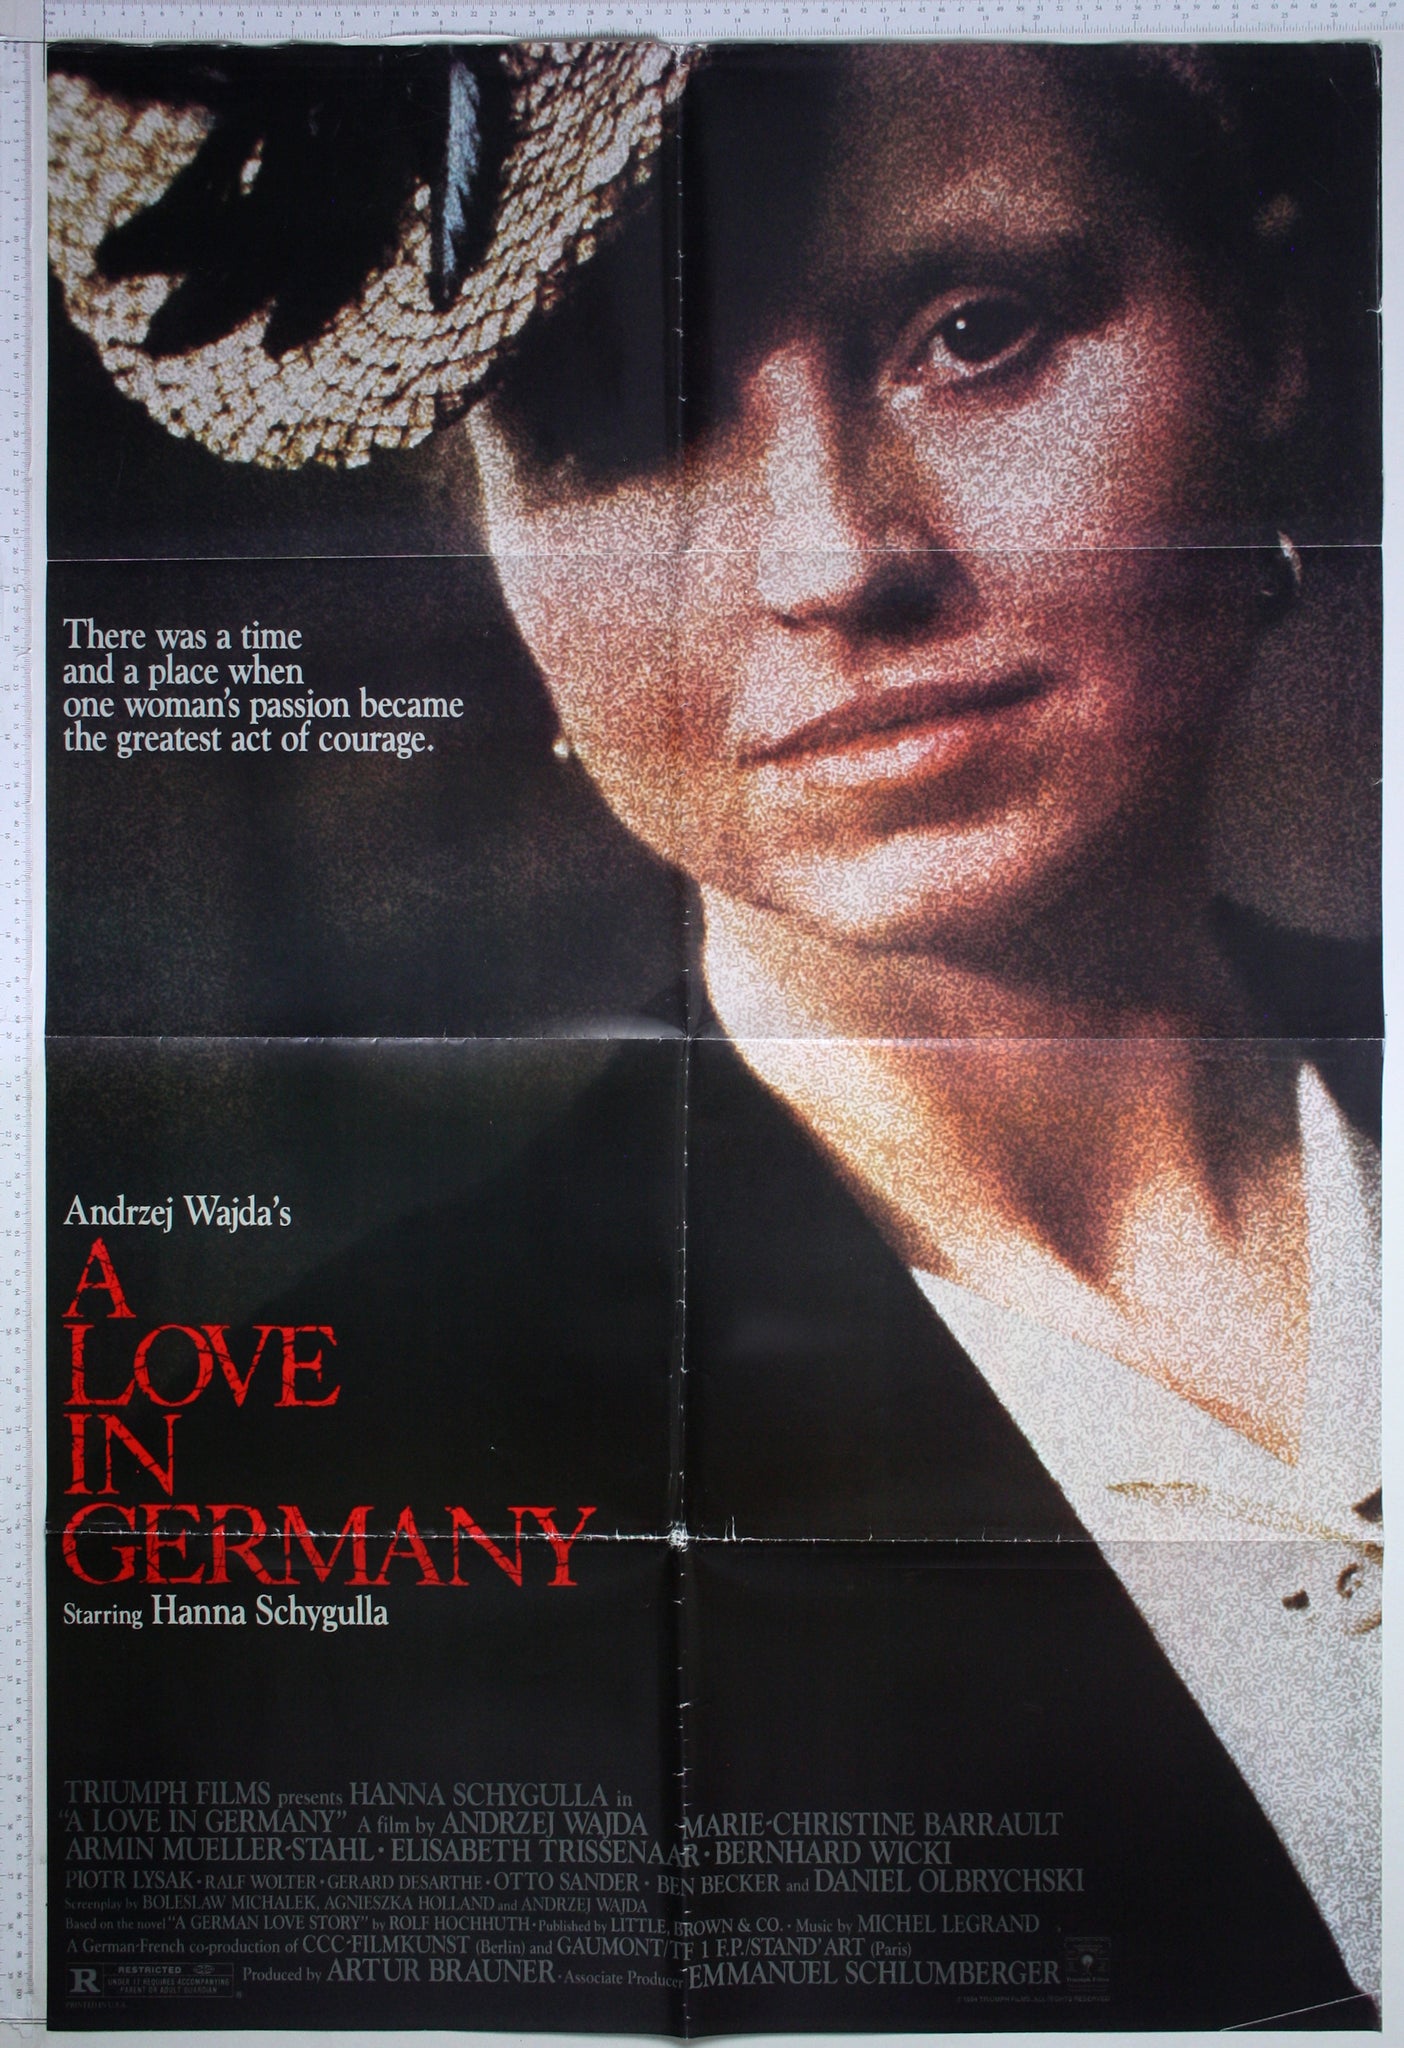 A Love in Germany (1983) US 1 Sheet Poster